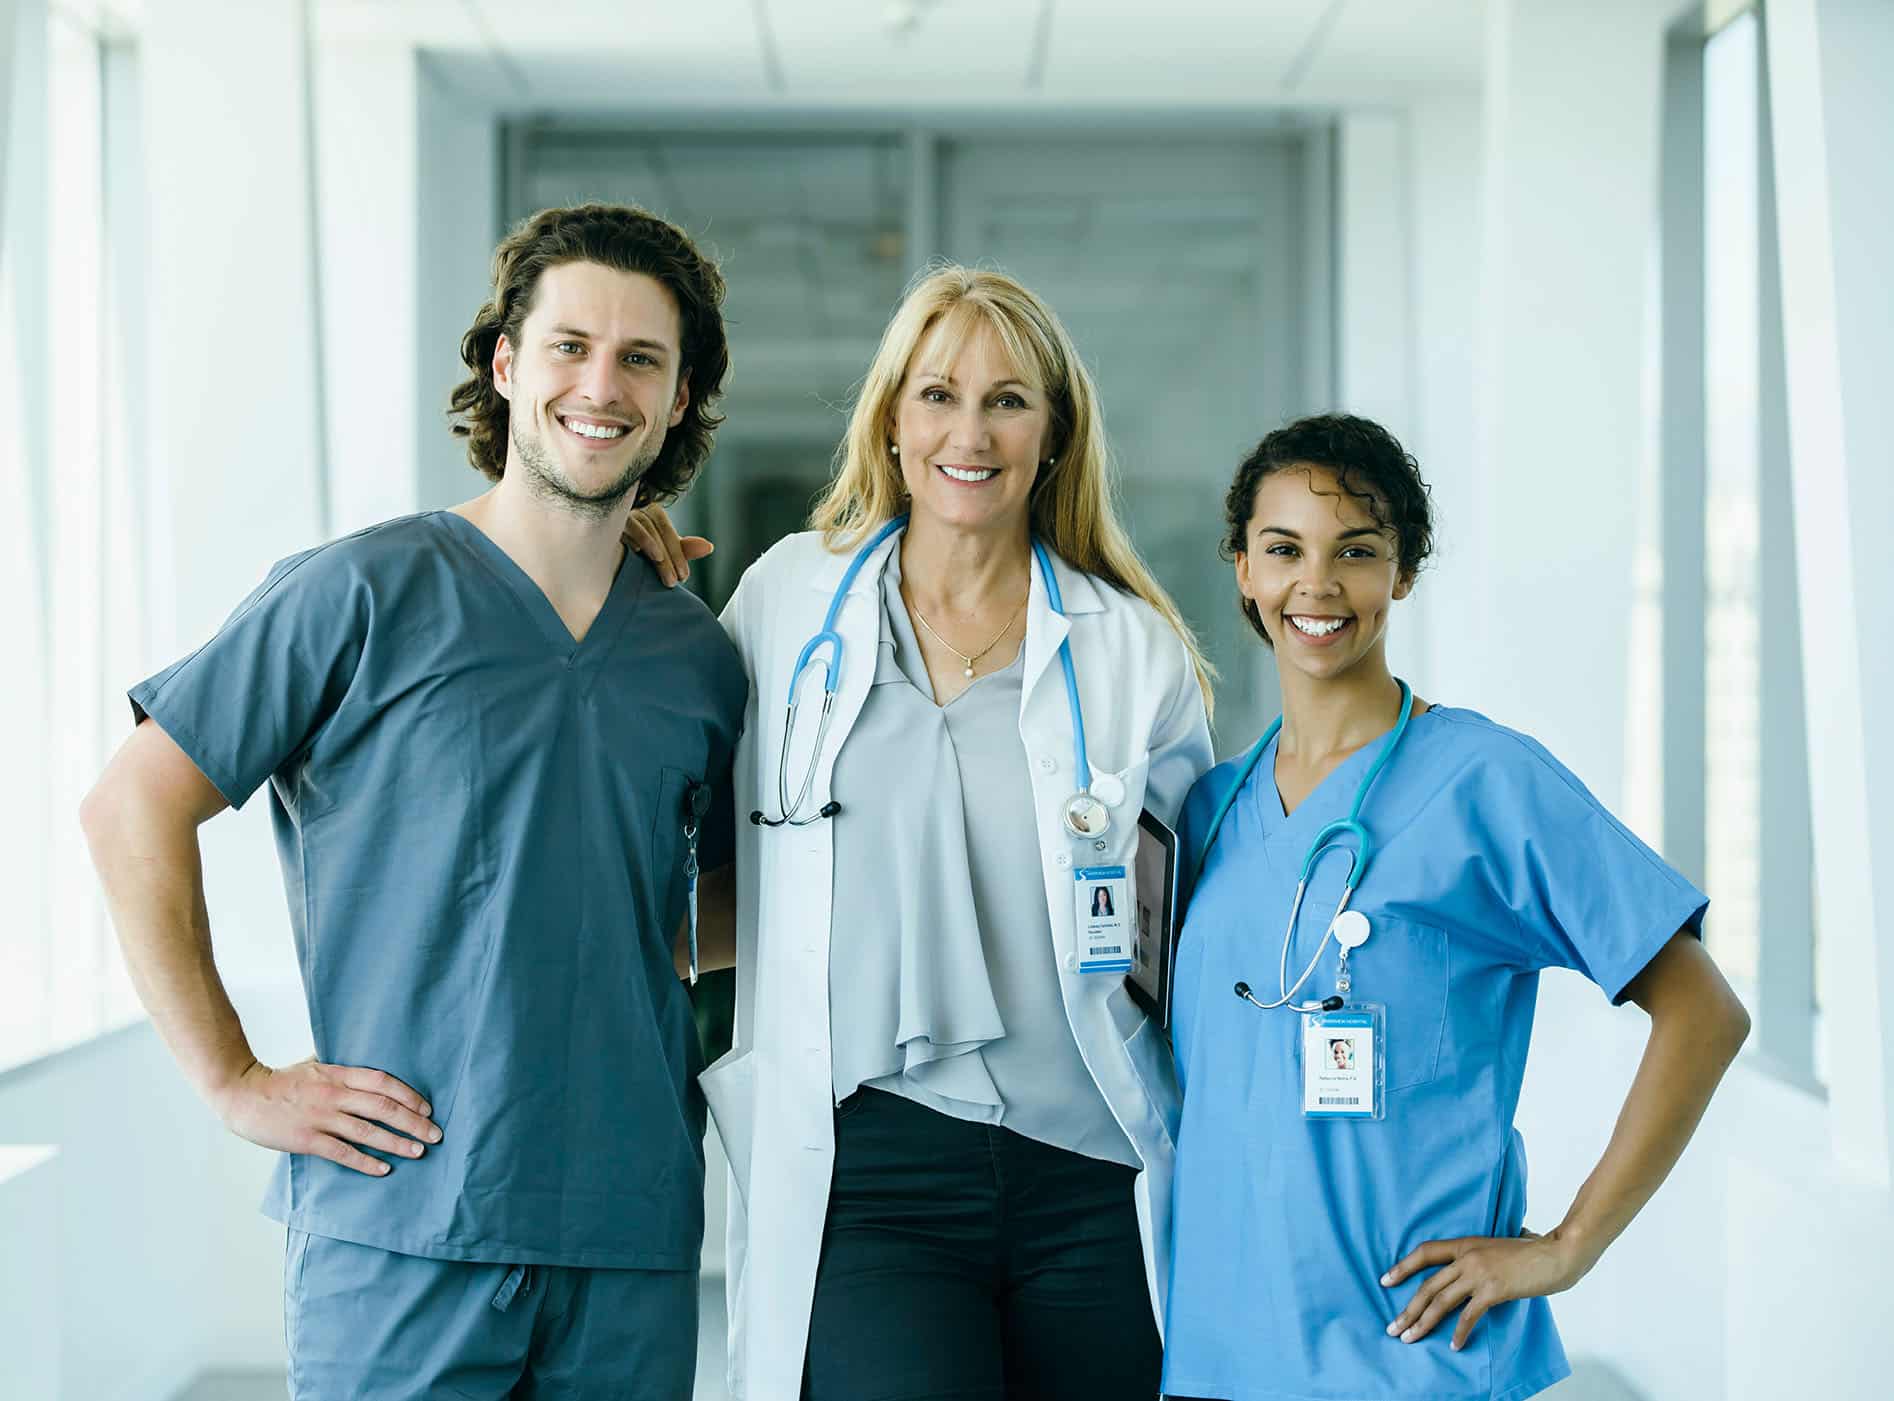 Nurses and doctor pose in hospital hallway